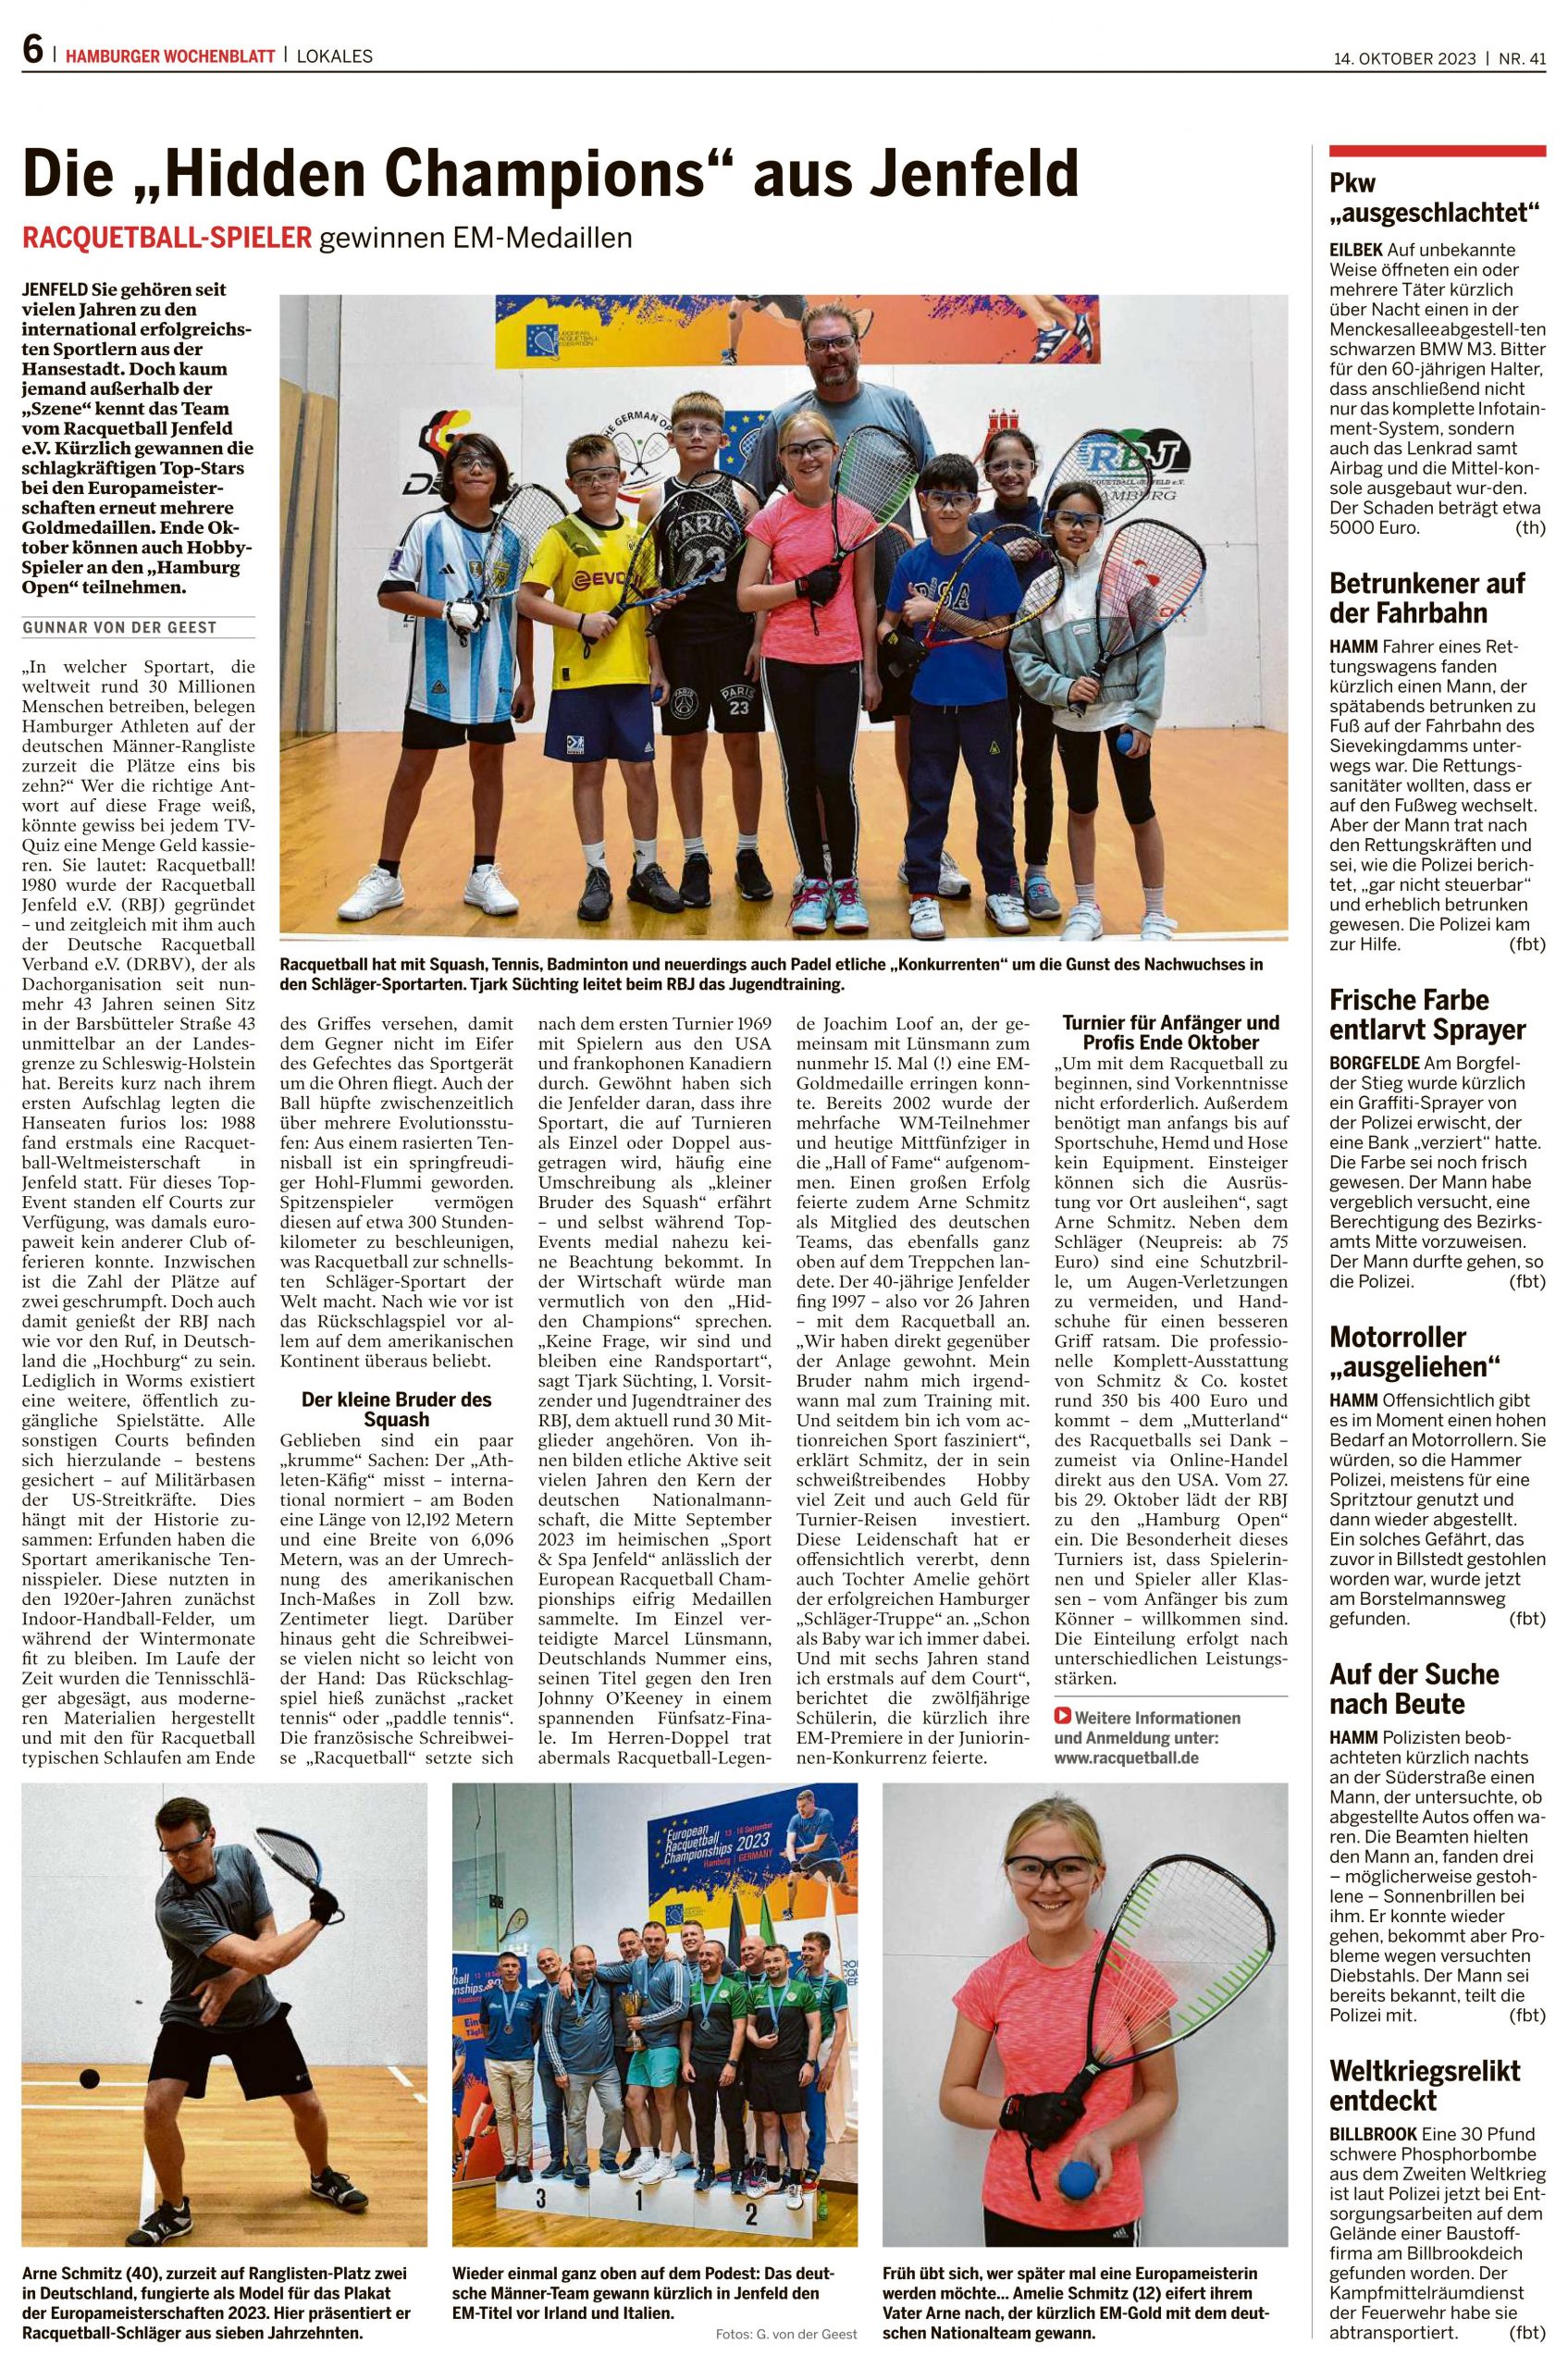 You are currently viewing Racquetball im Hamburger Wochenblatt